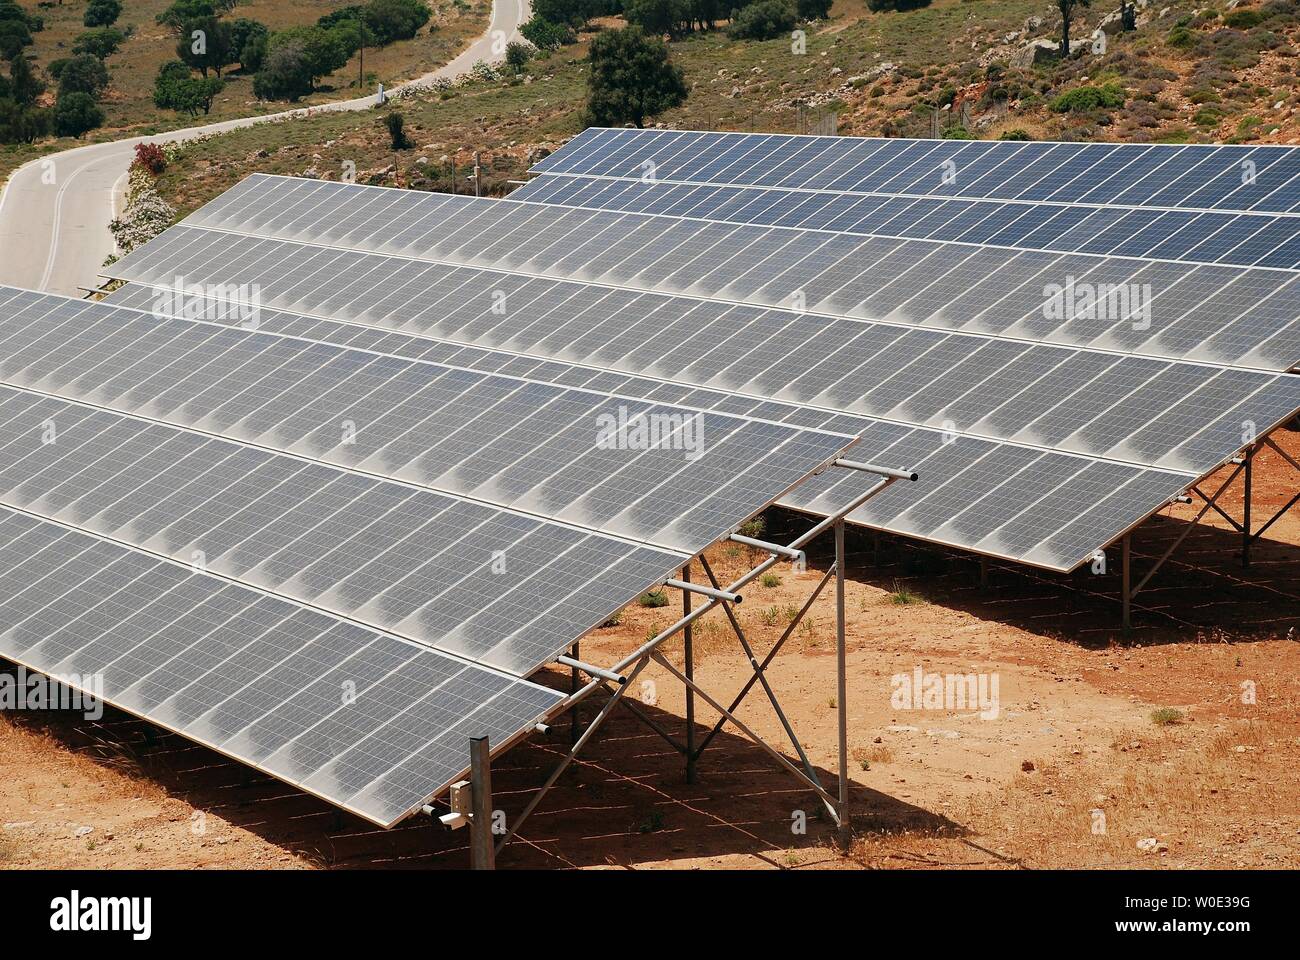 A bank of solar energy panels on the Greek island of Tilos. The island aims to be self sufficient in power through solar and wind energy. Stock Photo